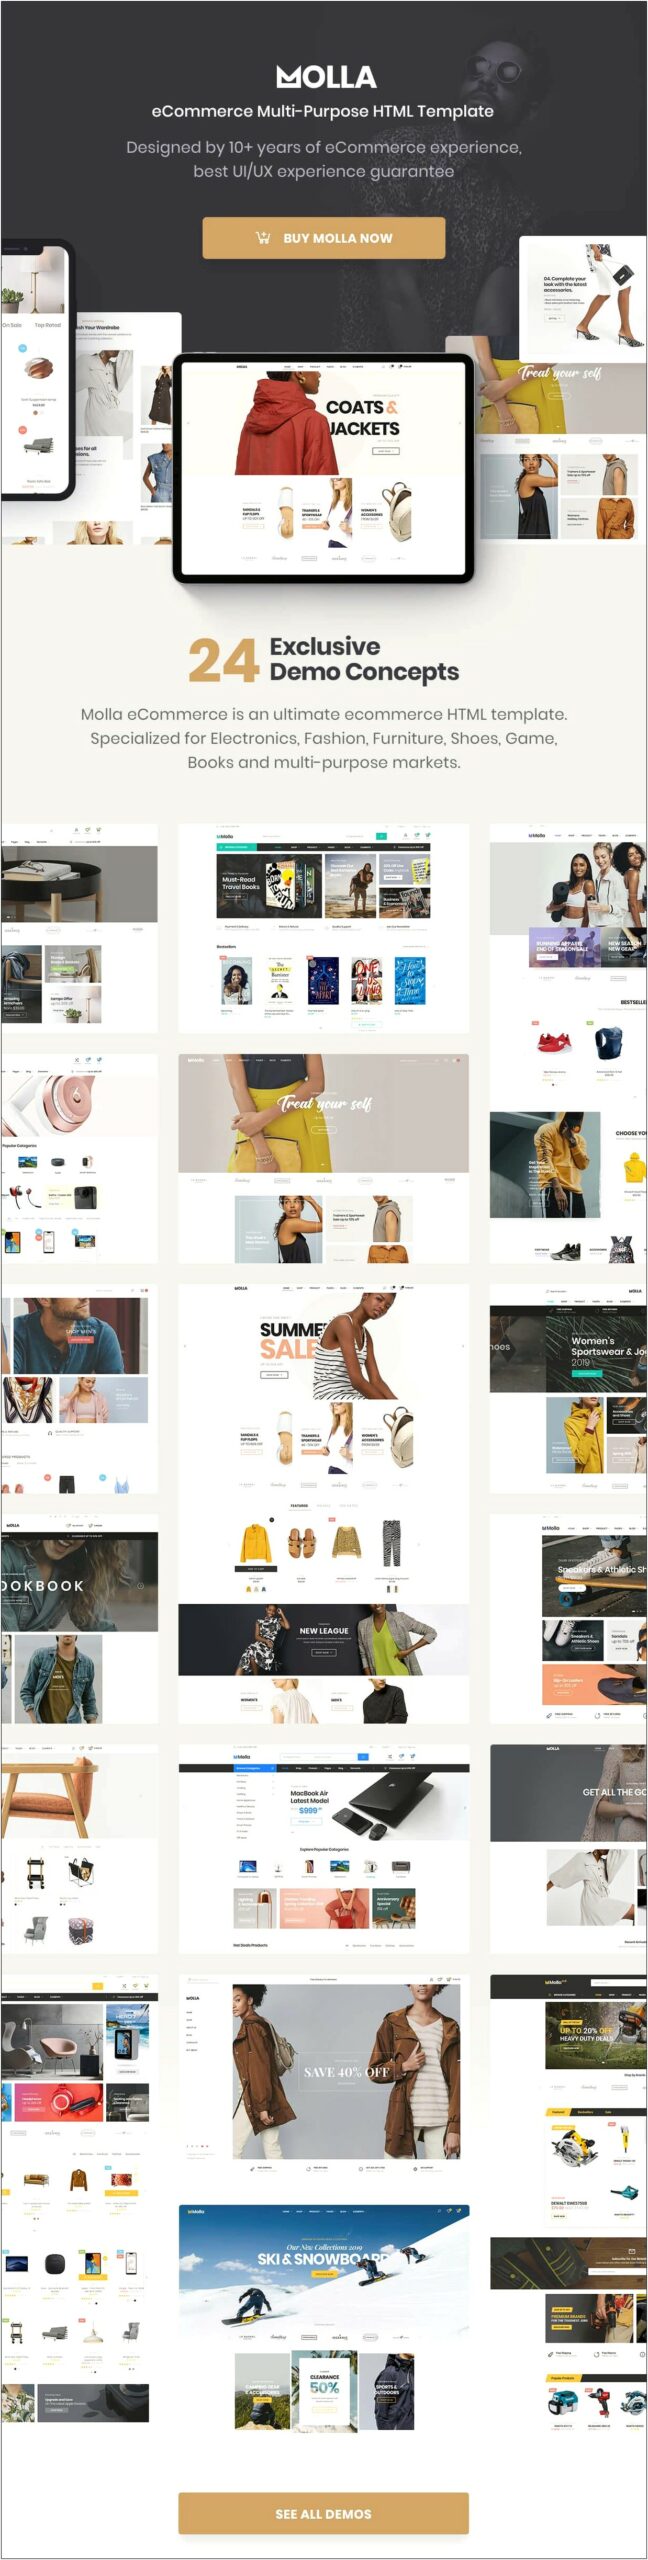 Molla Ecommerce Html5 Template Free Download